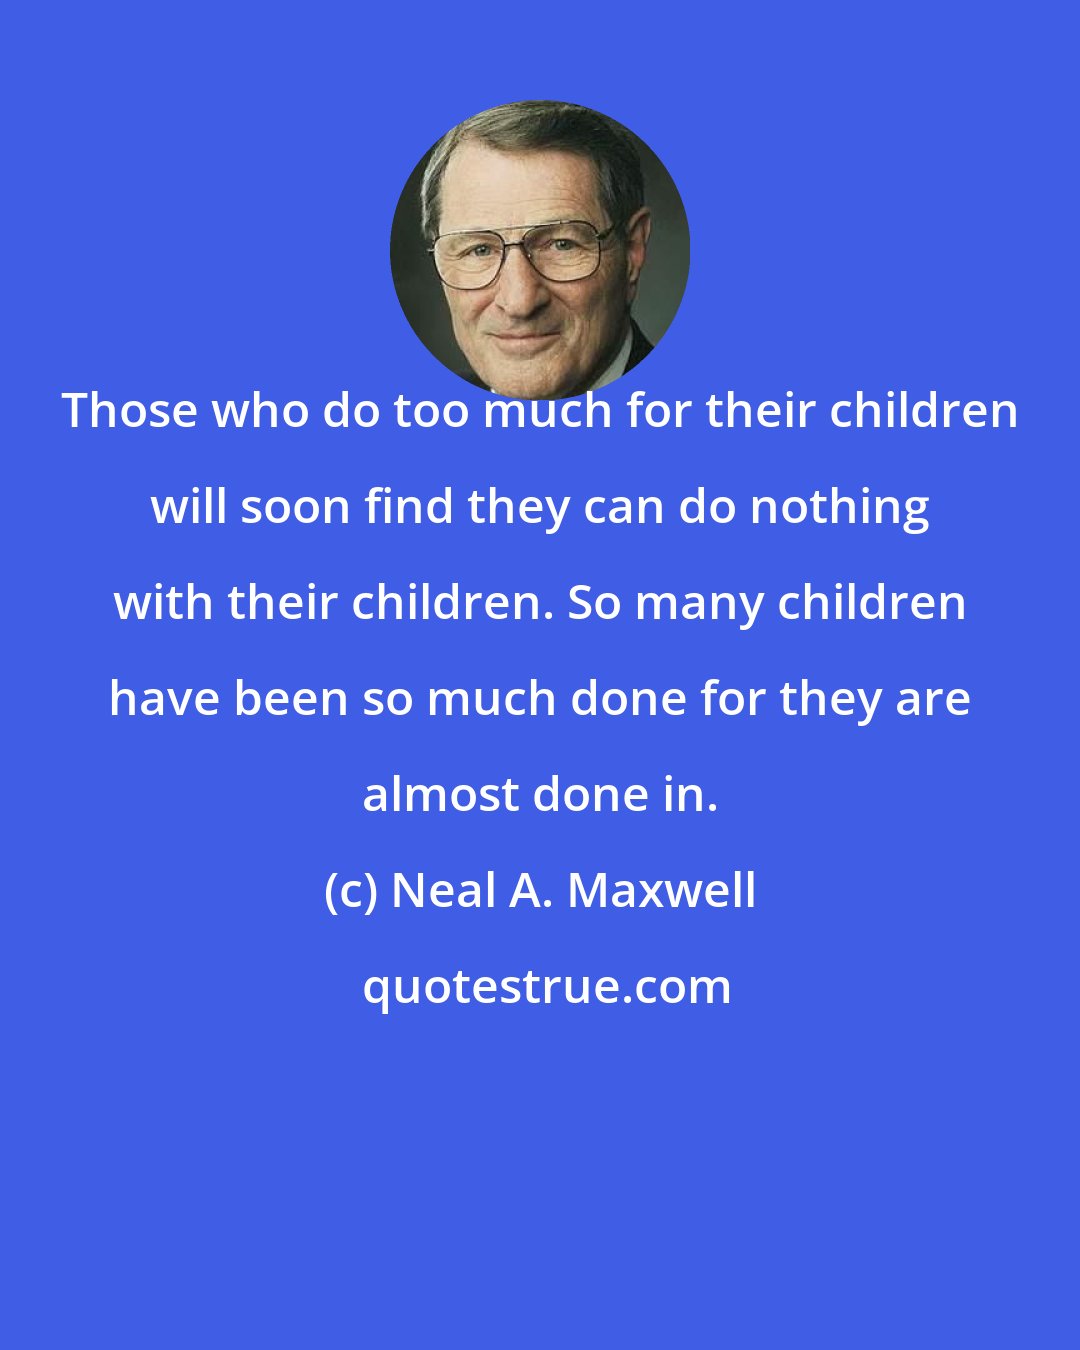 Neal A. Maxwell: Those who do too much for their children will soon find they can do nothing with their children. So many children have been so much done for they are almost done in.